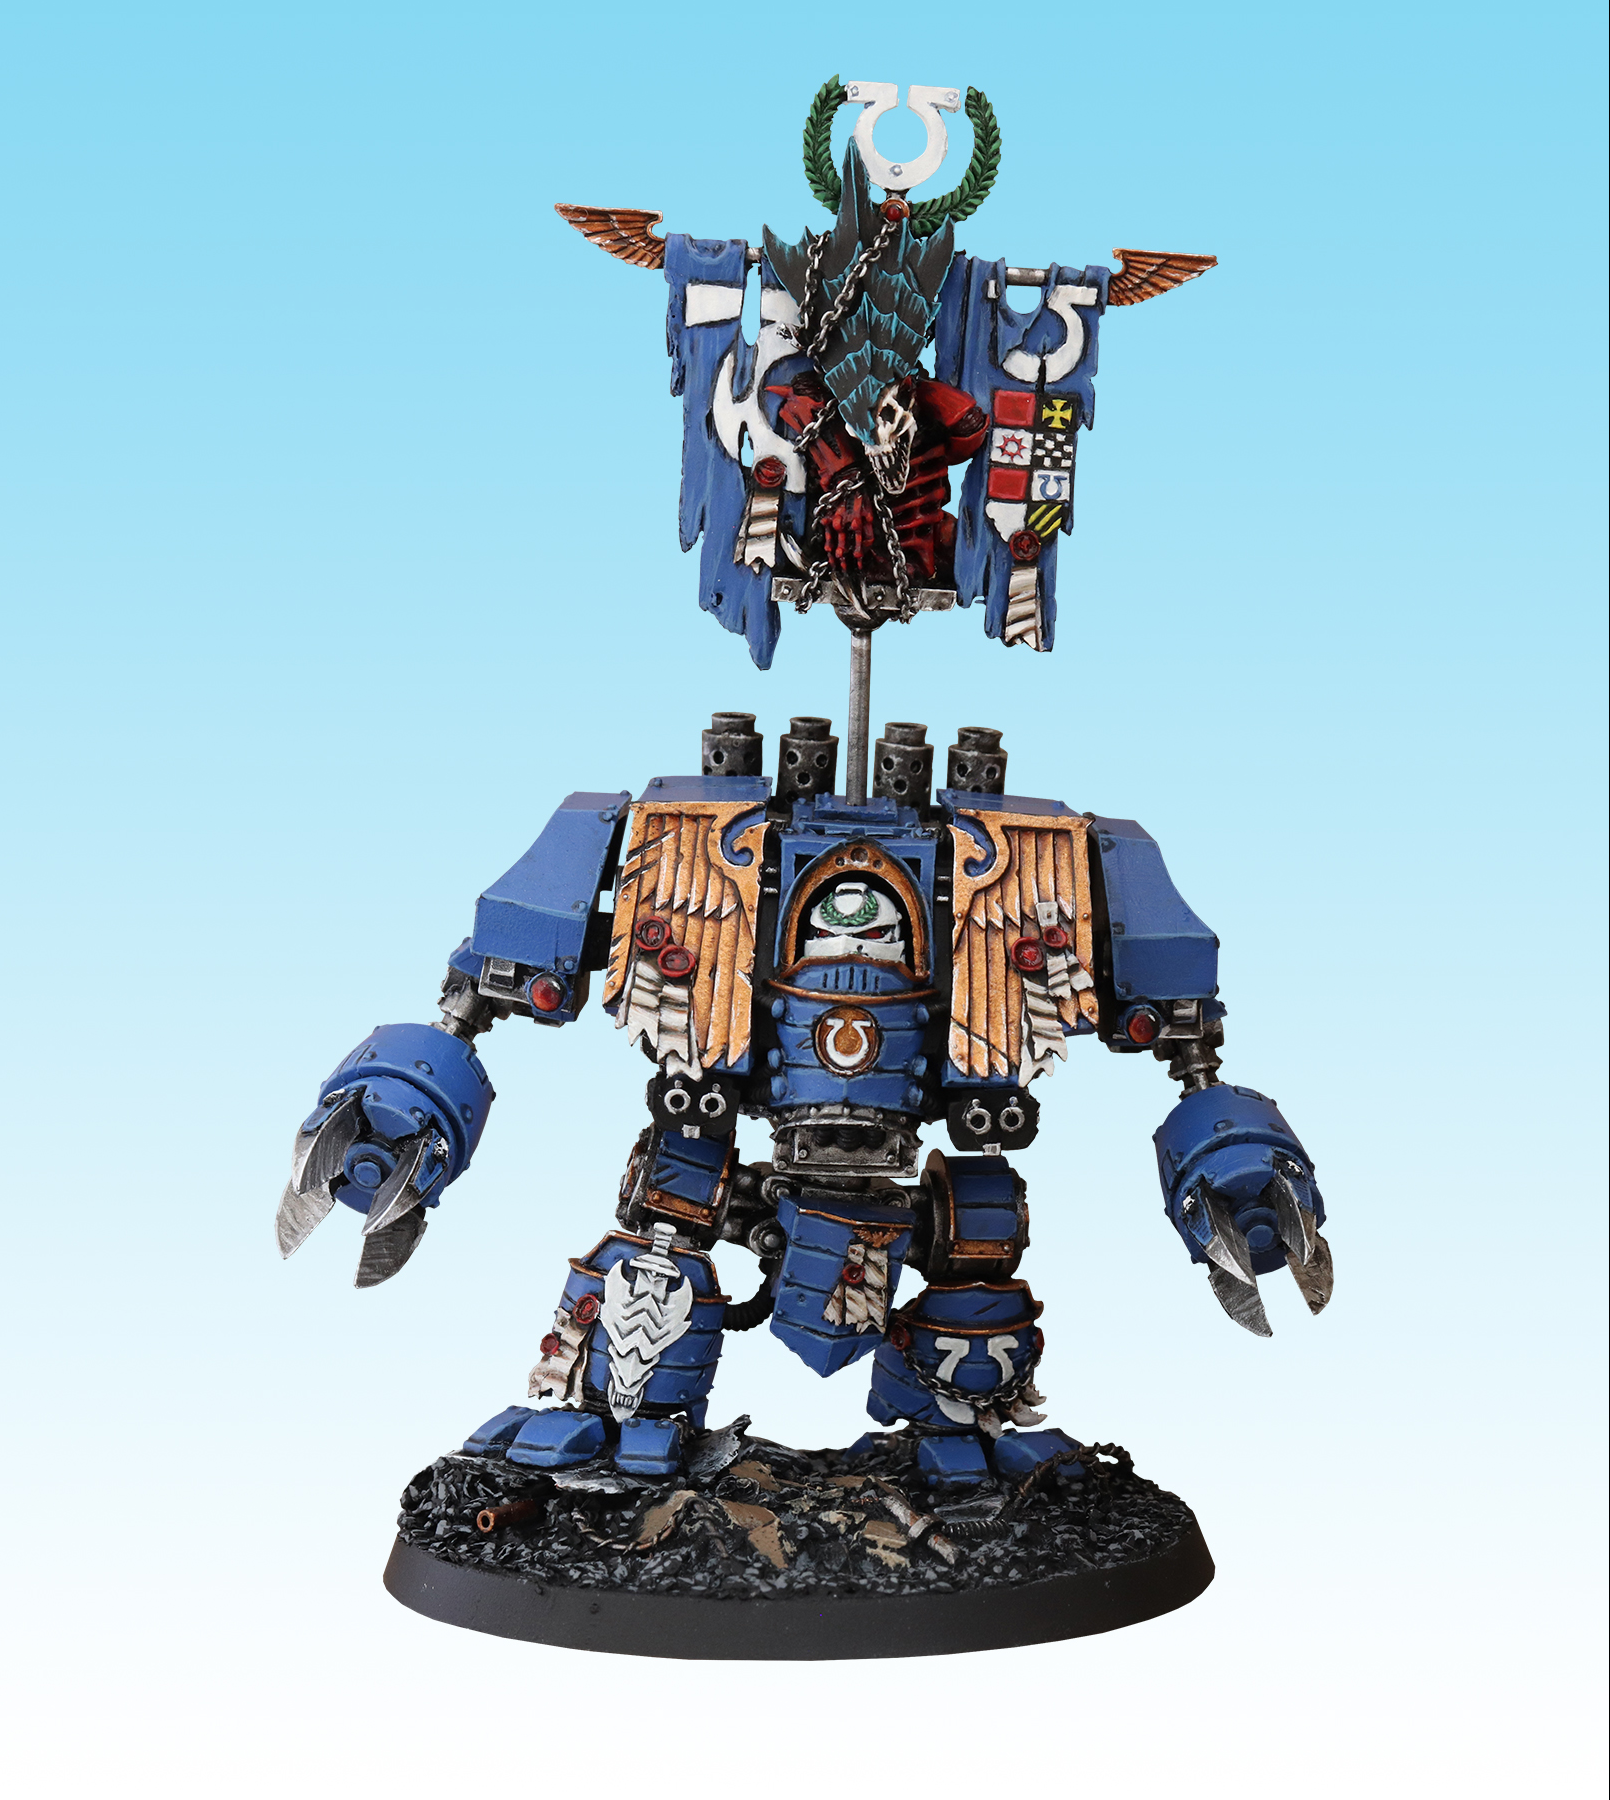 Adeptus Astartes, Dreadnought, Forge World, Space Marines, Squad, Ultramarines, Venerable Dreadnought, Warhammer 40,000